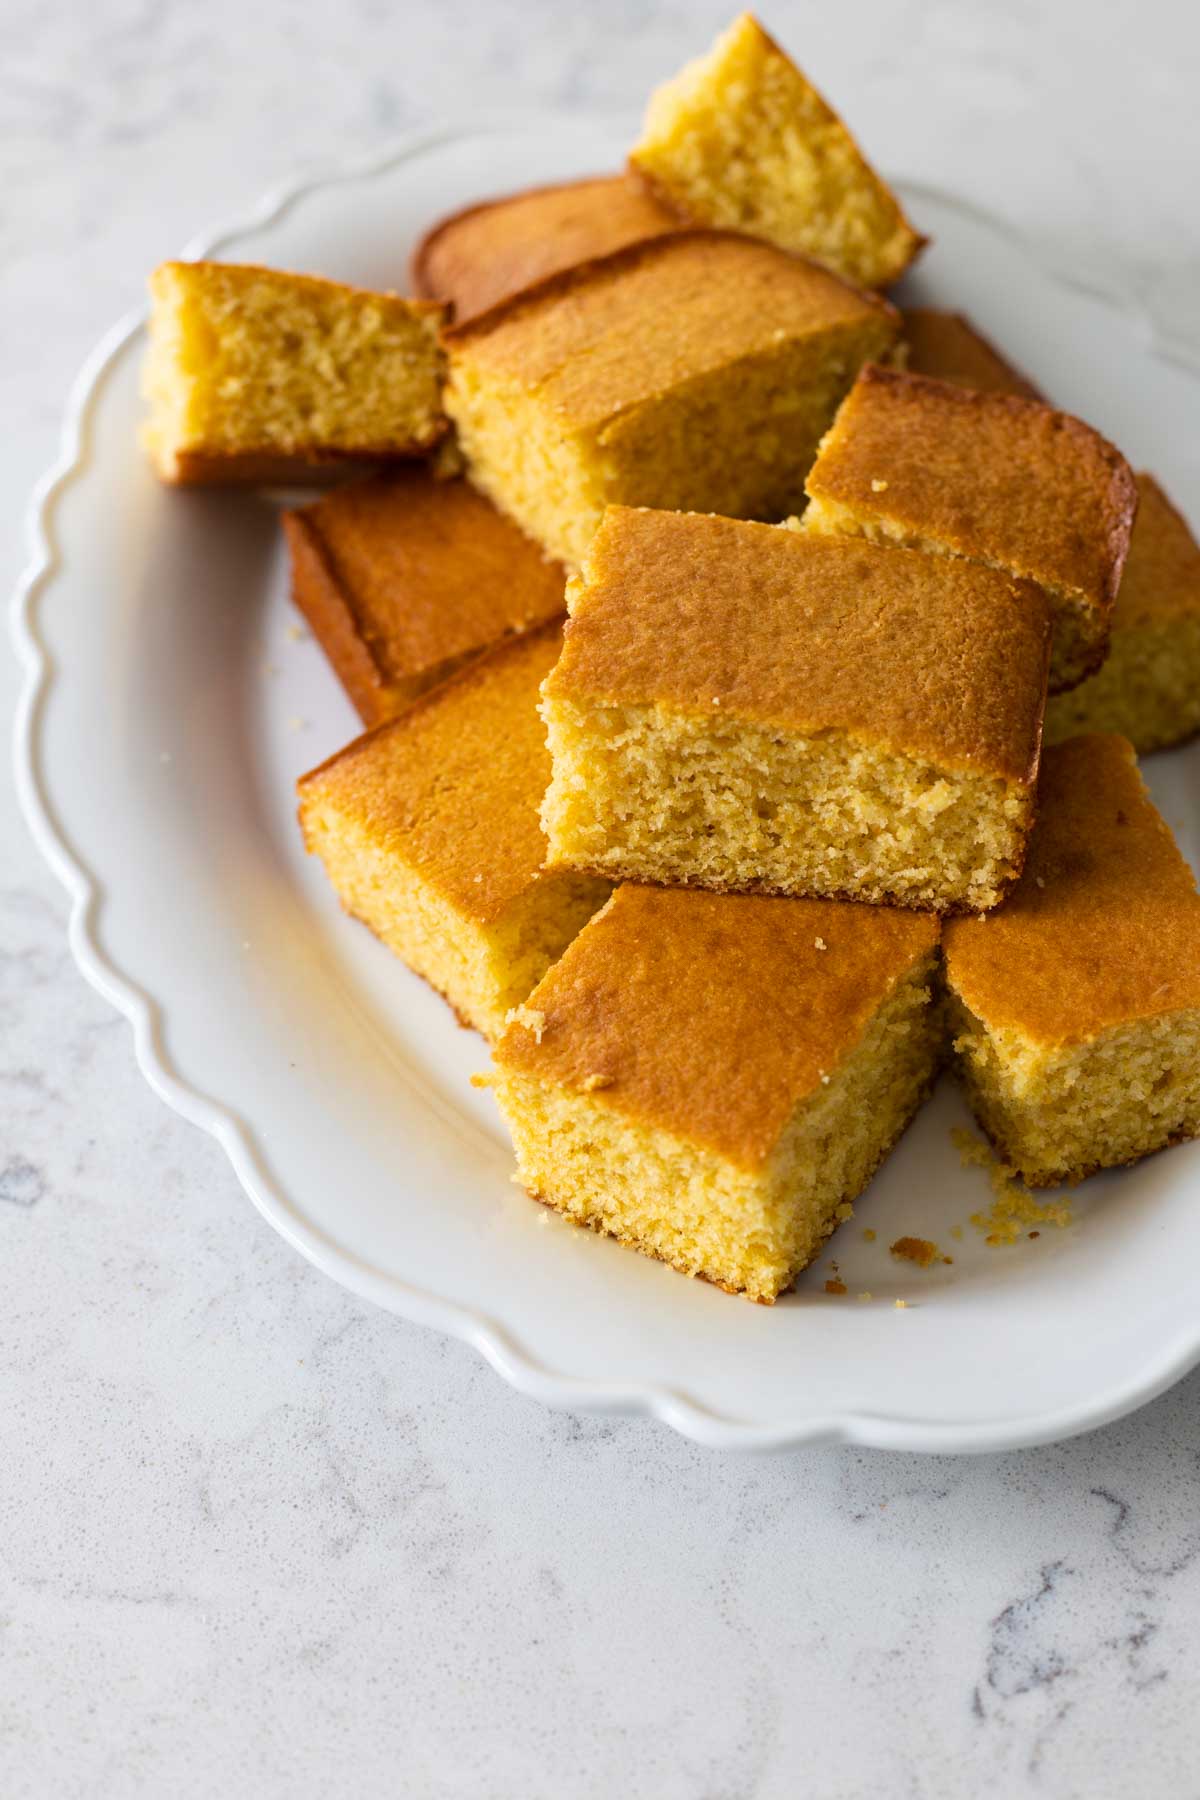 The large squares of buttermilk cornbread are served on a white ruffled platter for dinner.